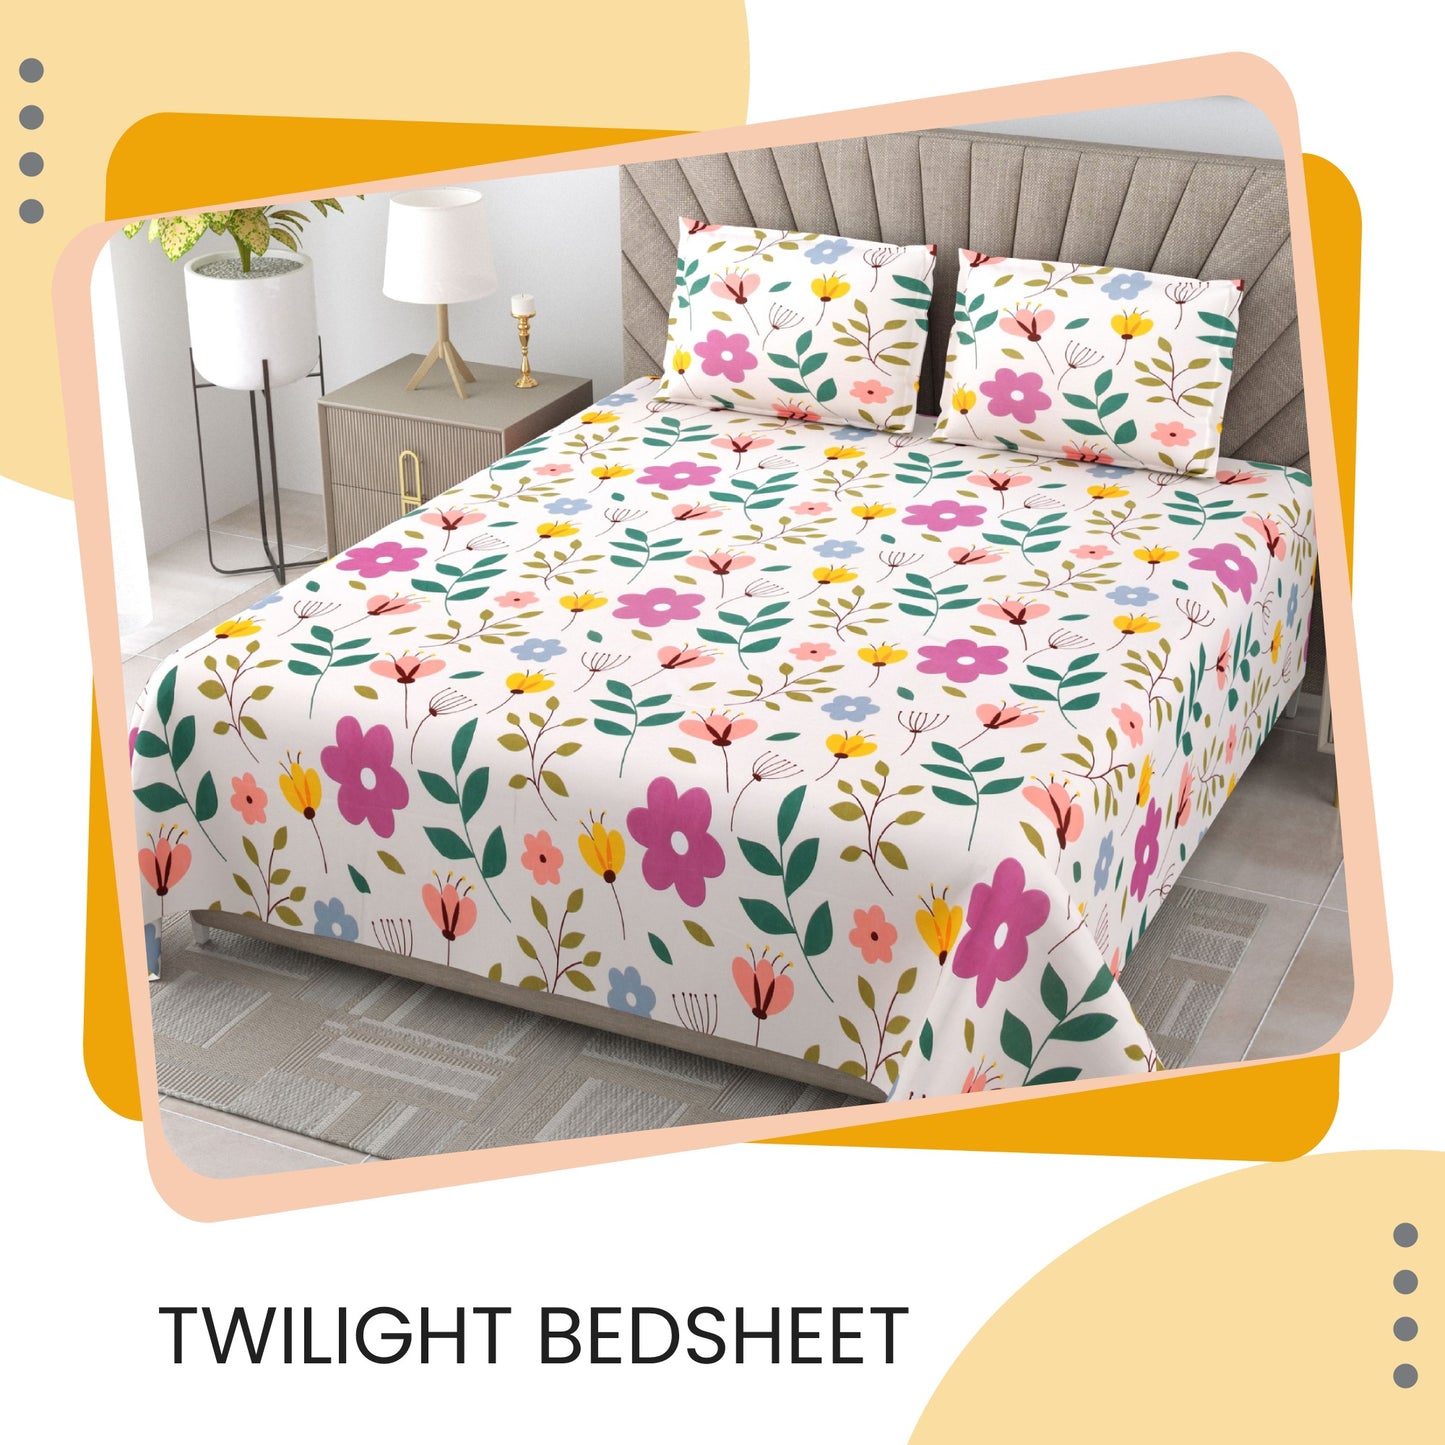 EasyGoods Super Soft King Size Bedsheet with 2 Pillow Covers - Ultra Smooth Colorful Floral Bedsheet | Twilight